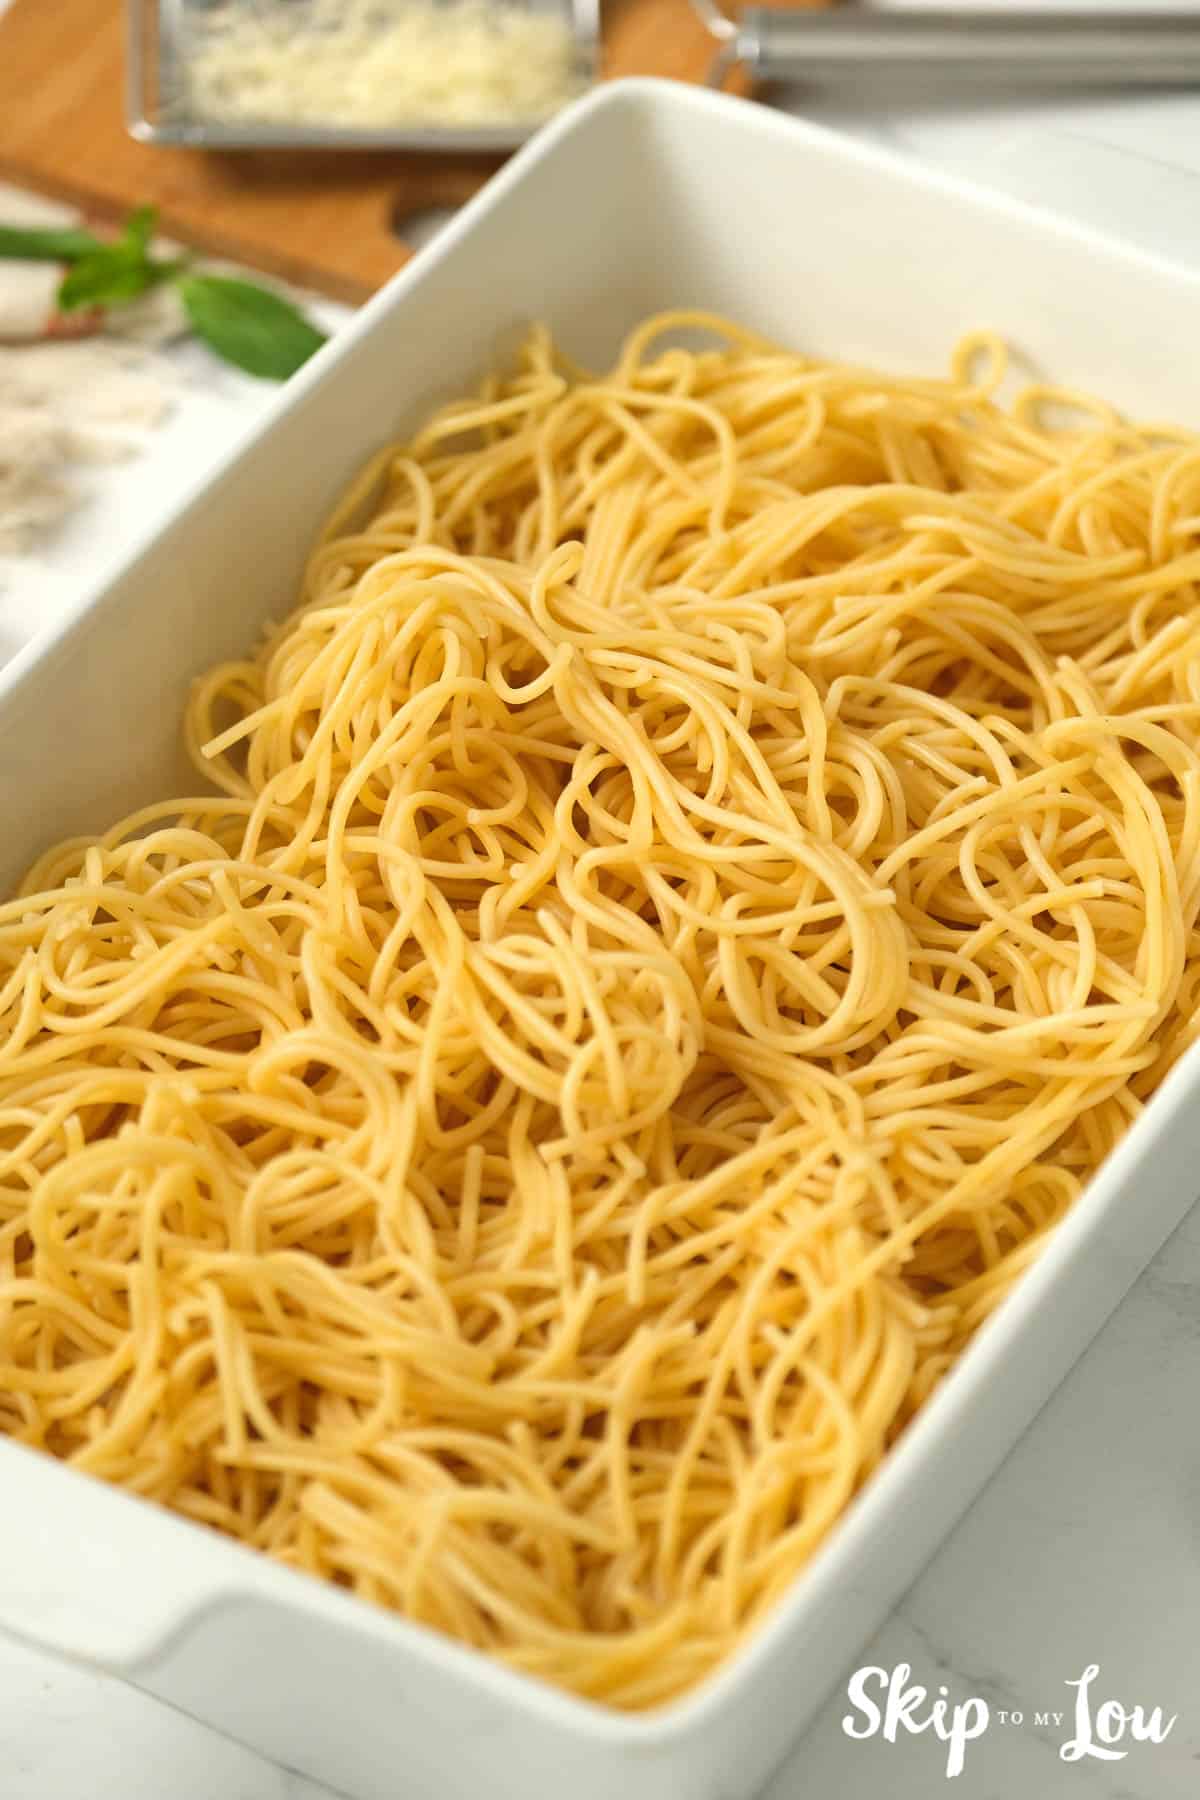 Cooked and drained spaghetti noodles in a rectangular white casserole dish, by Skip to my Lou.